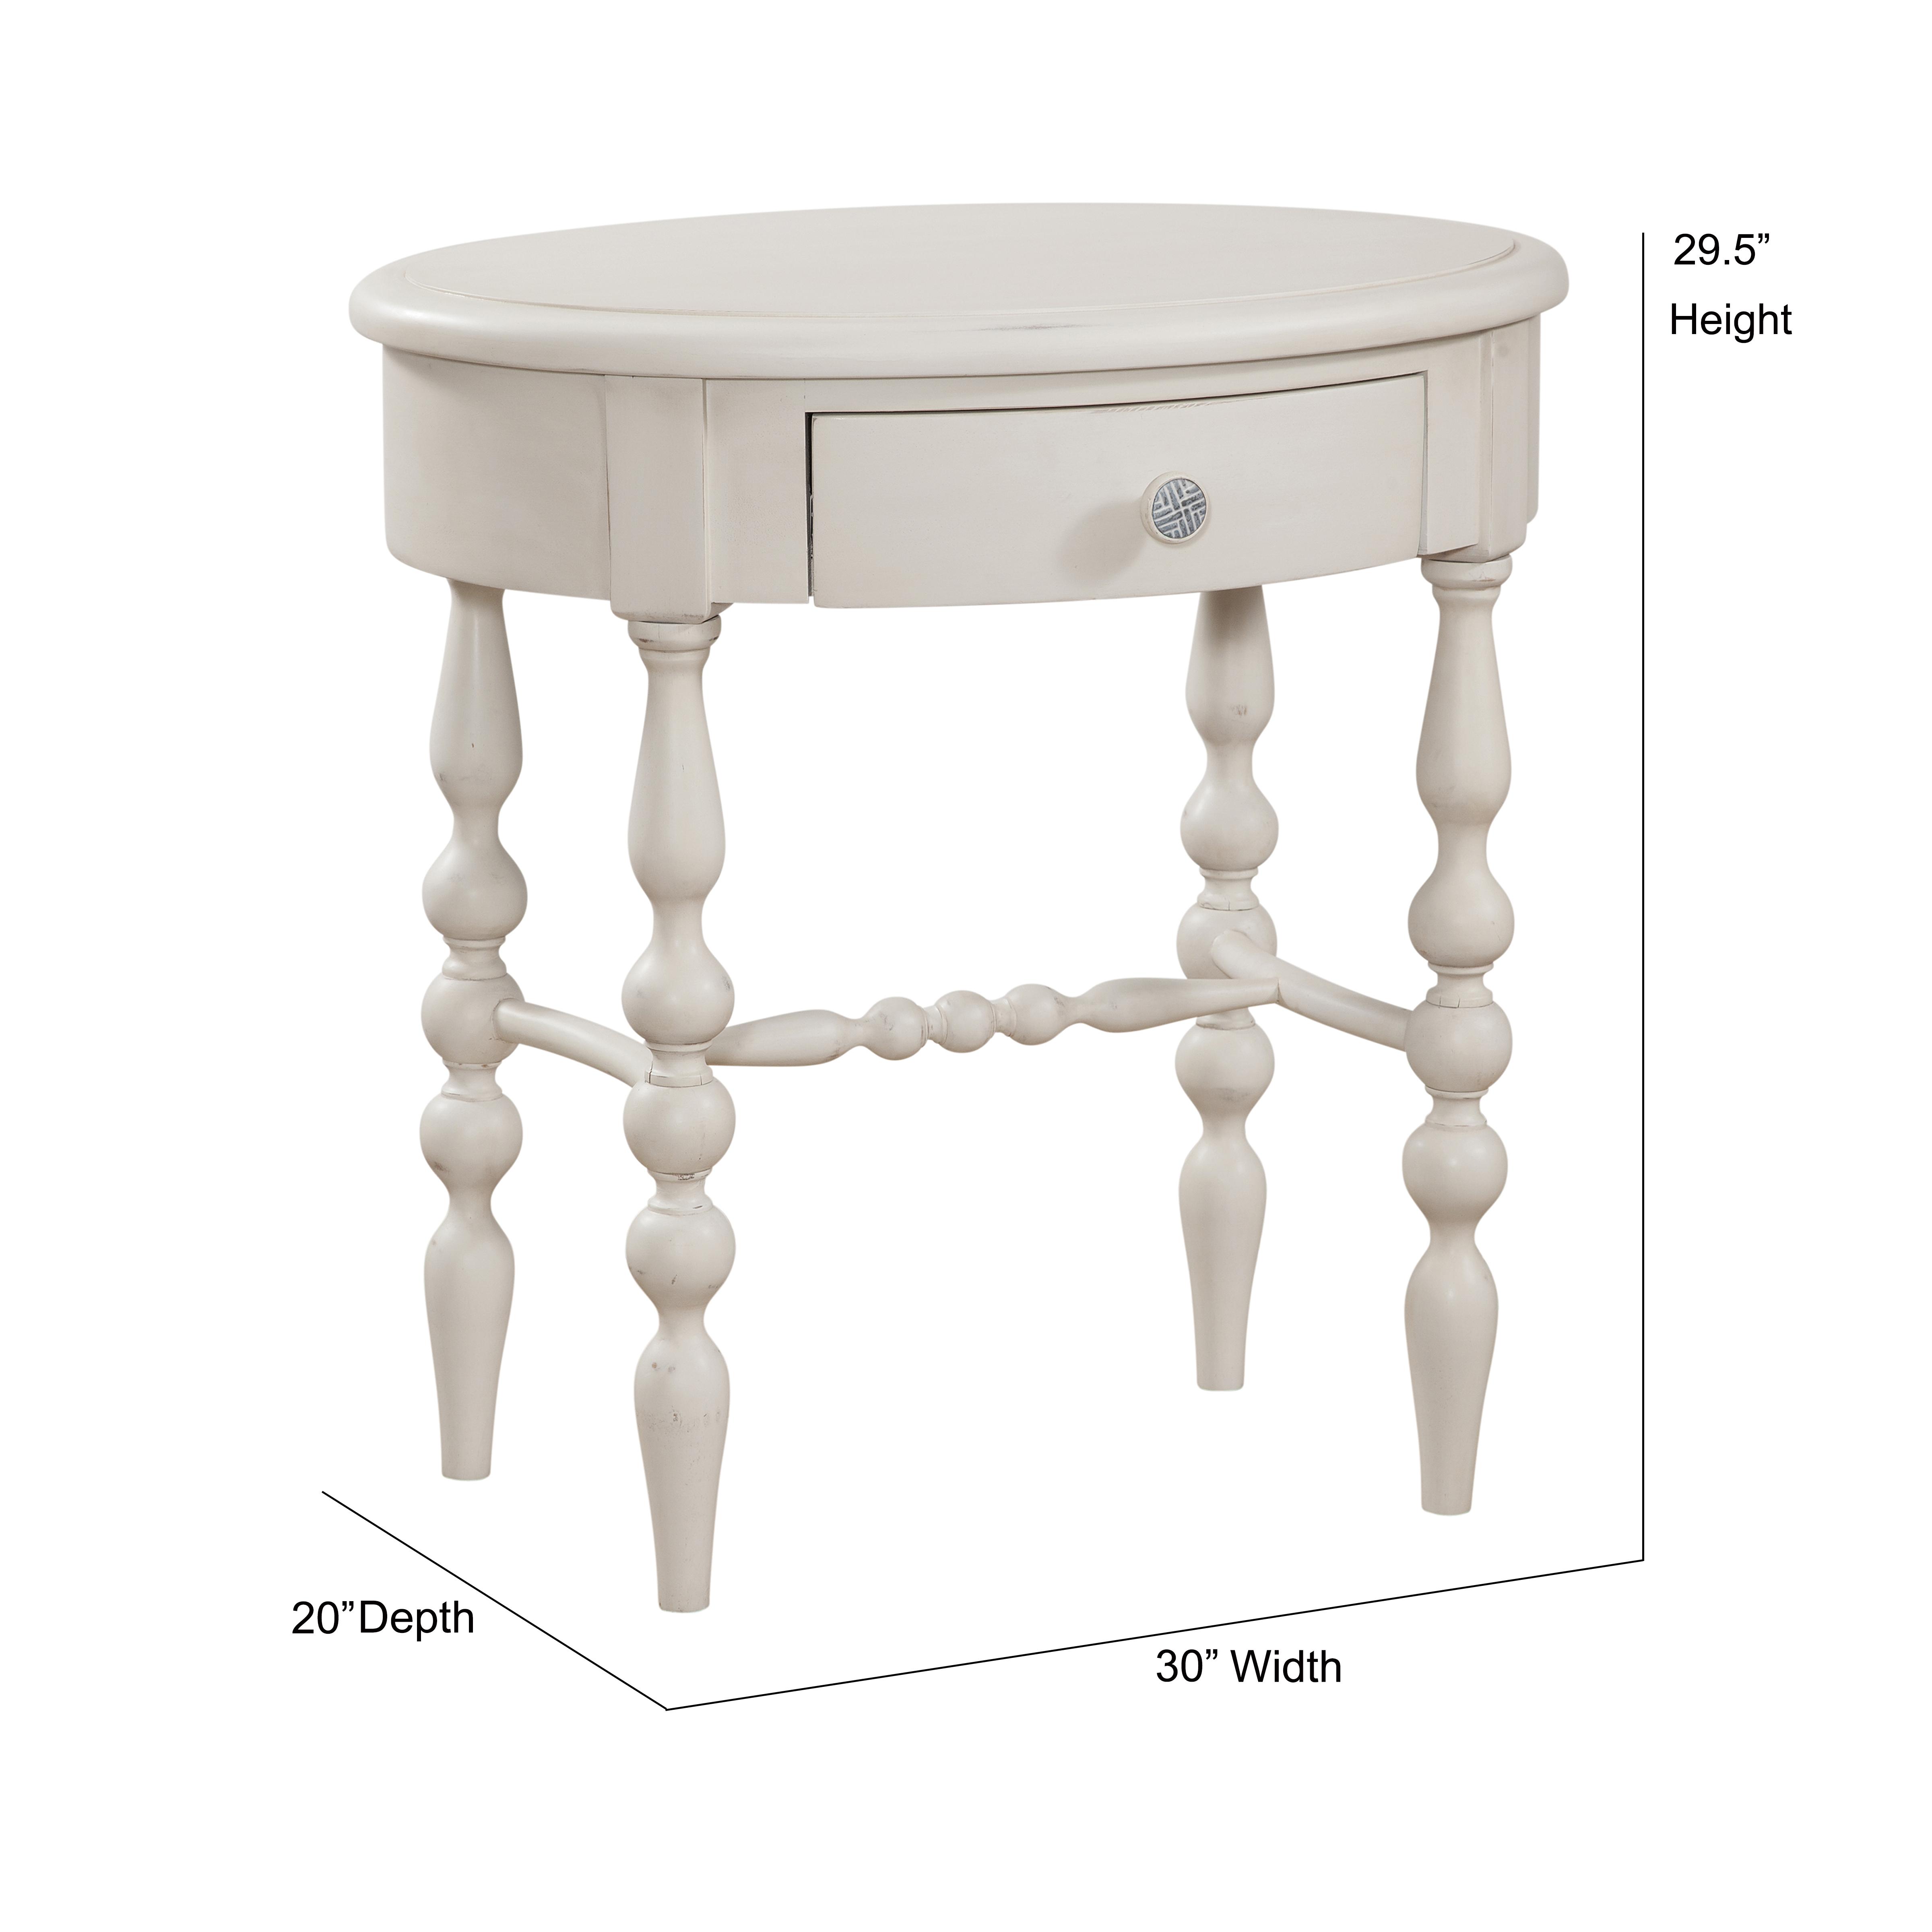 Youth, Traditional, Cottage Accent Table Rodanthe 3910-410 3910-410 in White Finish 